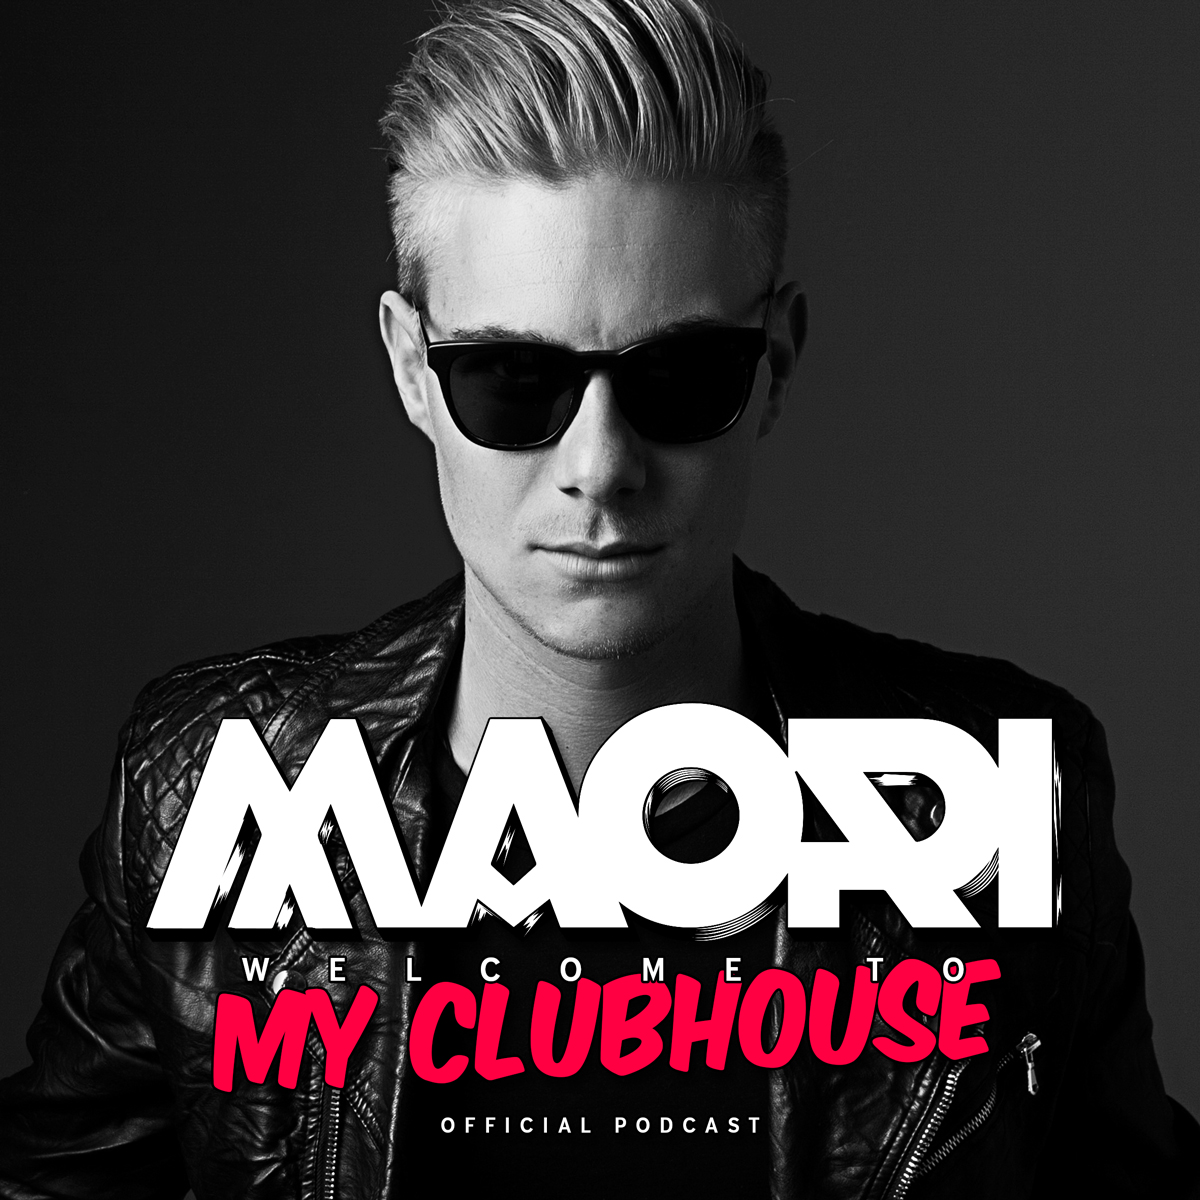 My Clubhouse by Maori - Podcast #030